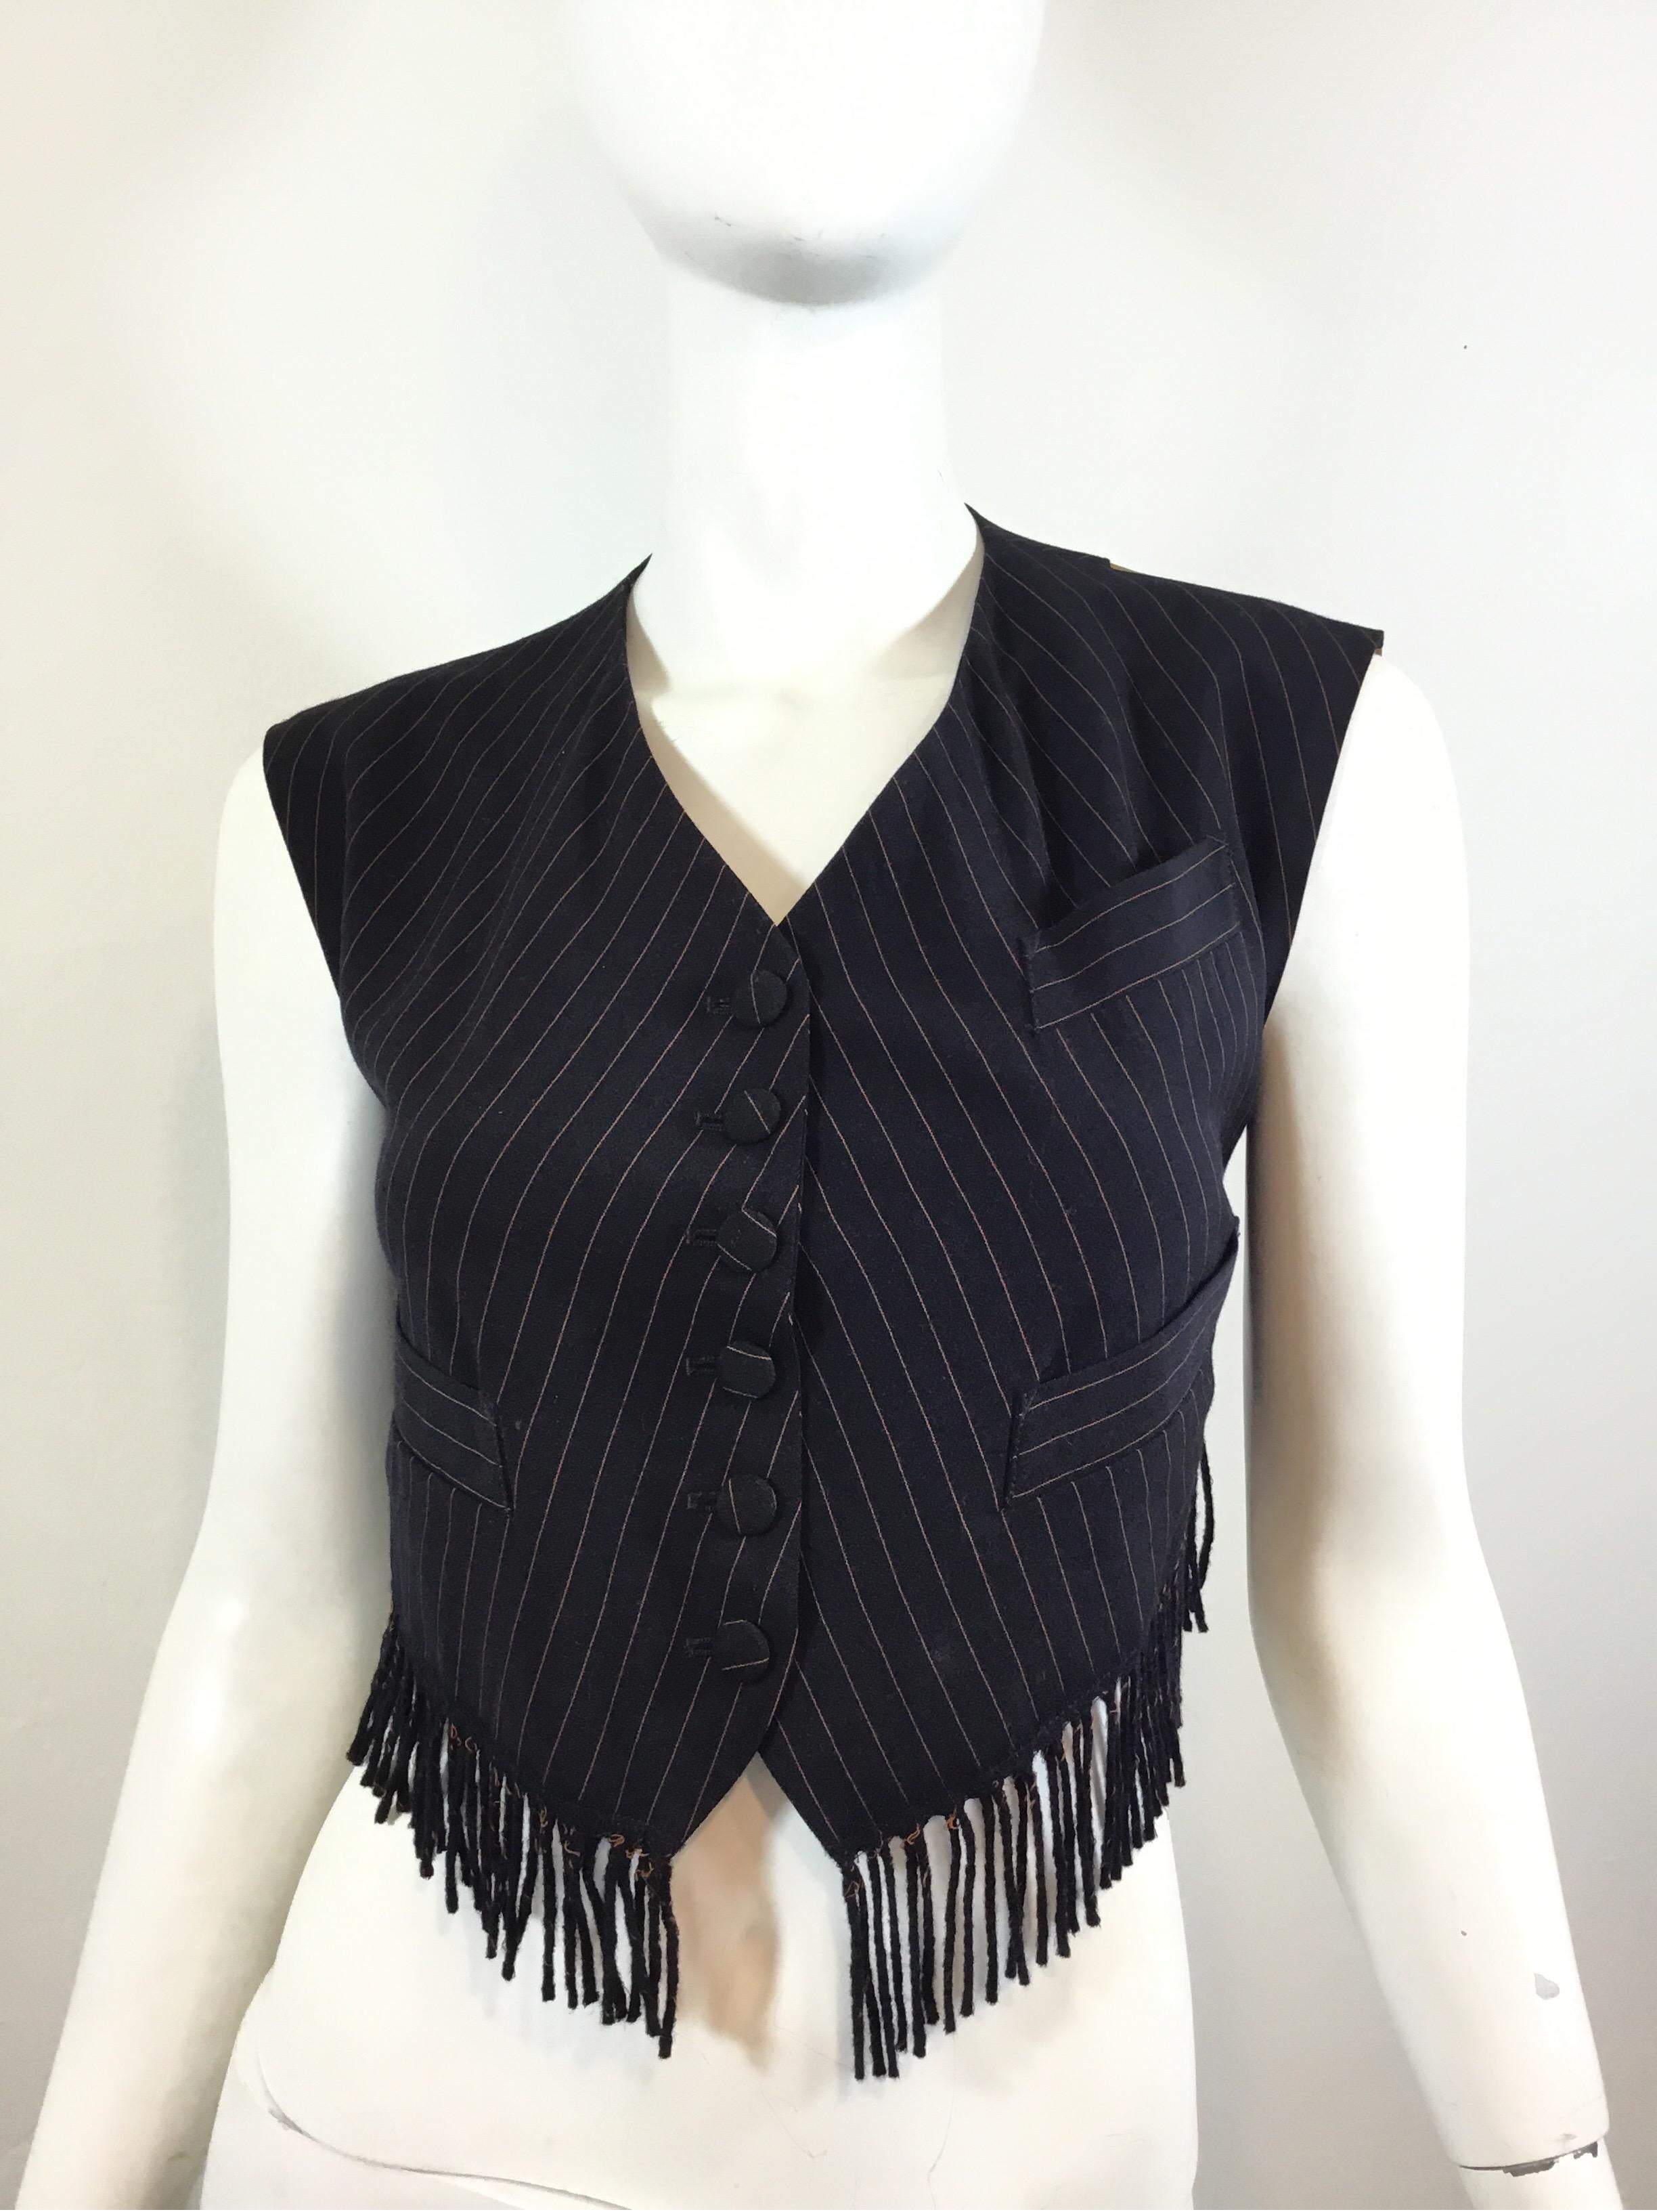 Jean Paul Gaultier vest featured in navy with a pinstriped pattern throughout and a fringed hem. Vest has 3 functional pockets and button closures at the front and an adjustable strap at the back. Labeled Size 46, made in Italy.

Bust 38”, length 14”